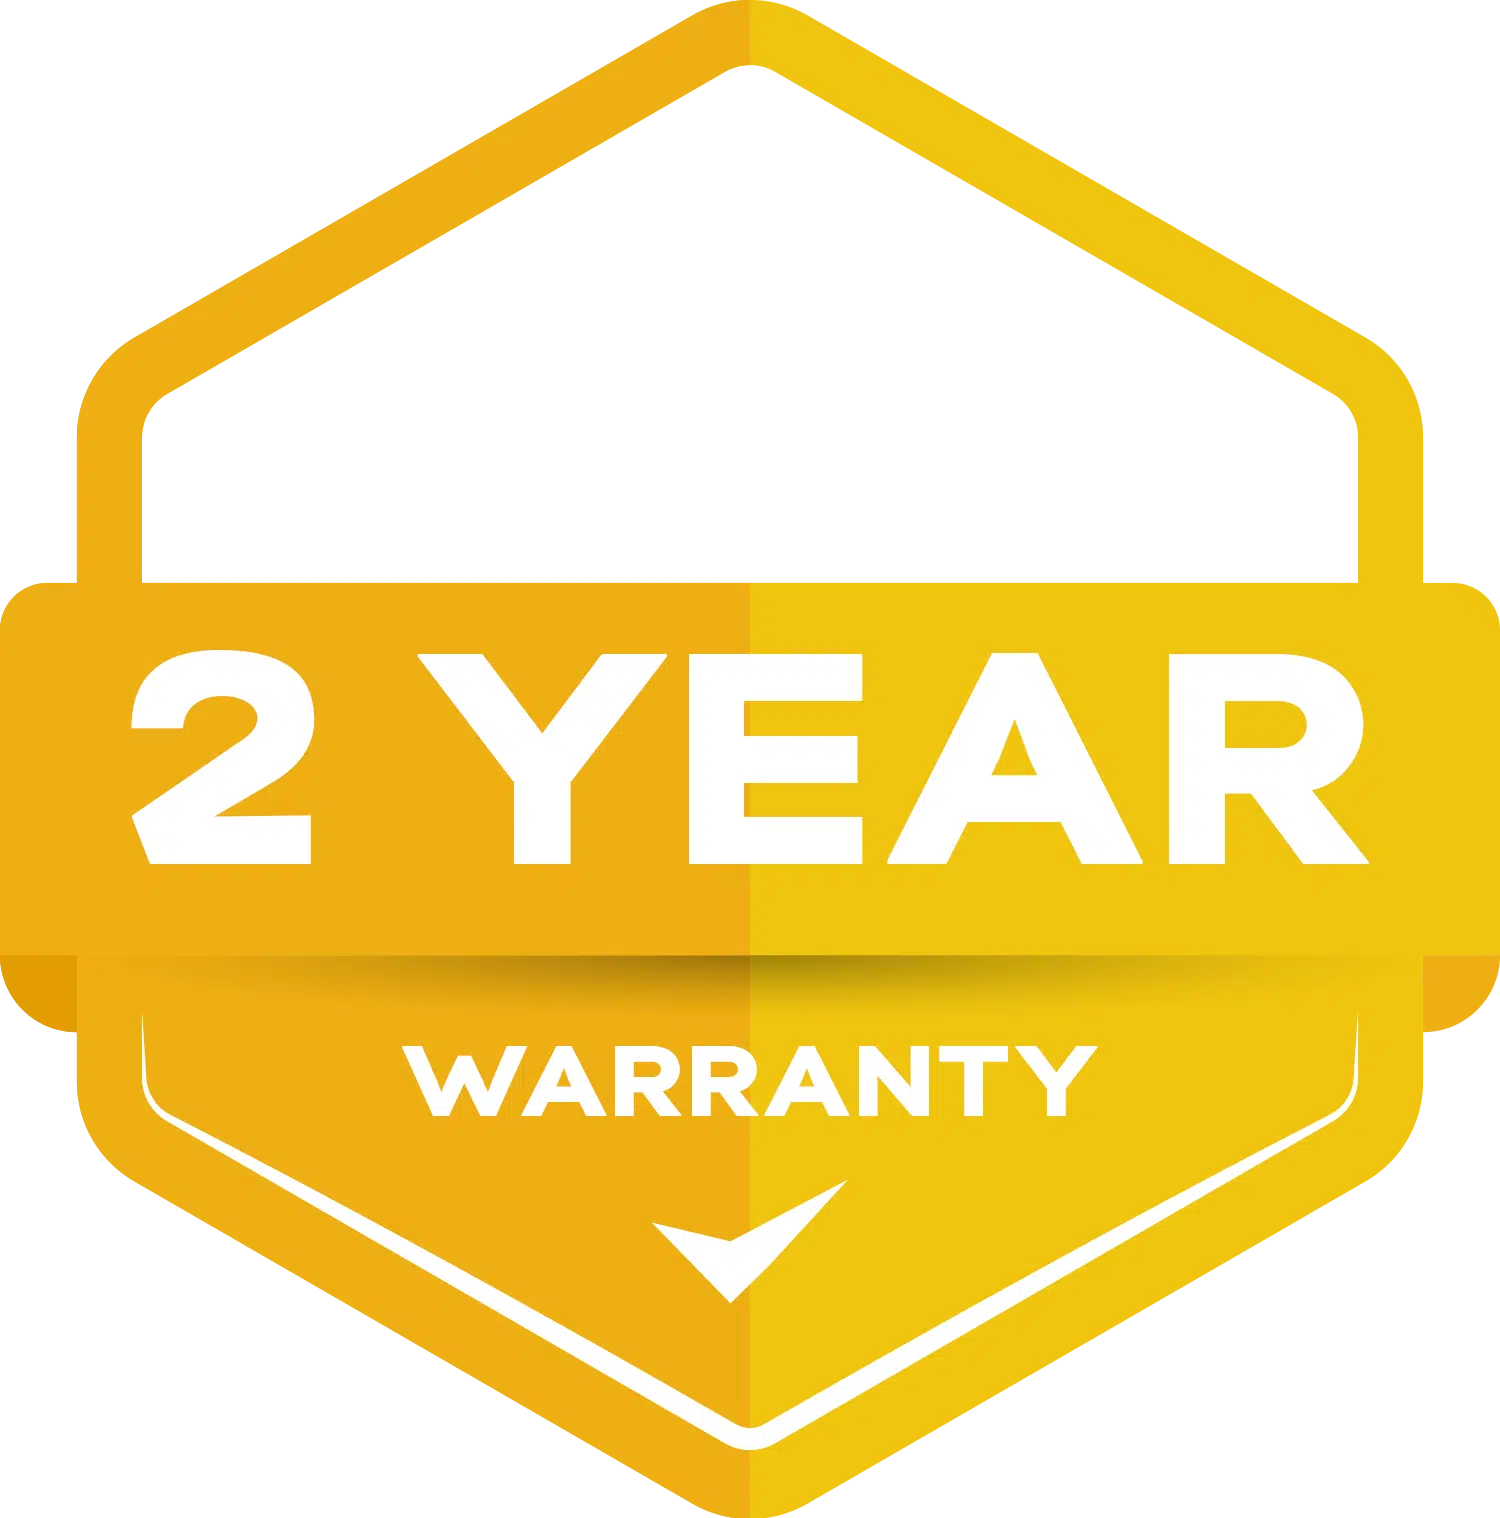 Extended Warranty 2 Year – P4000